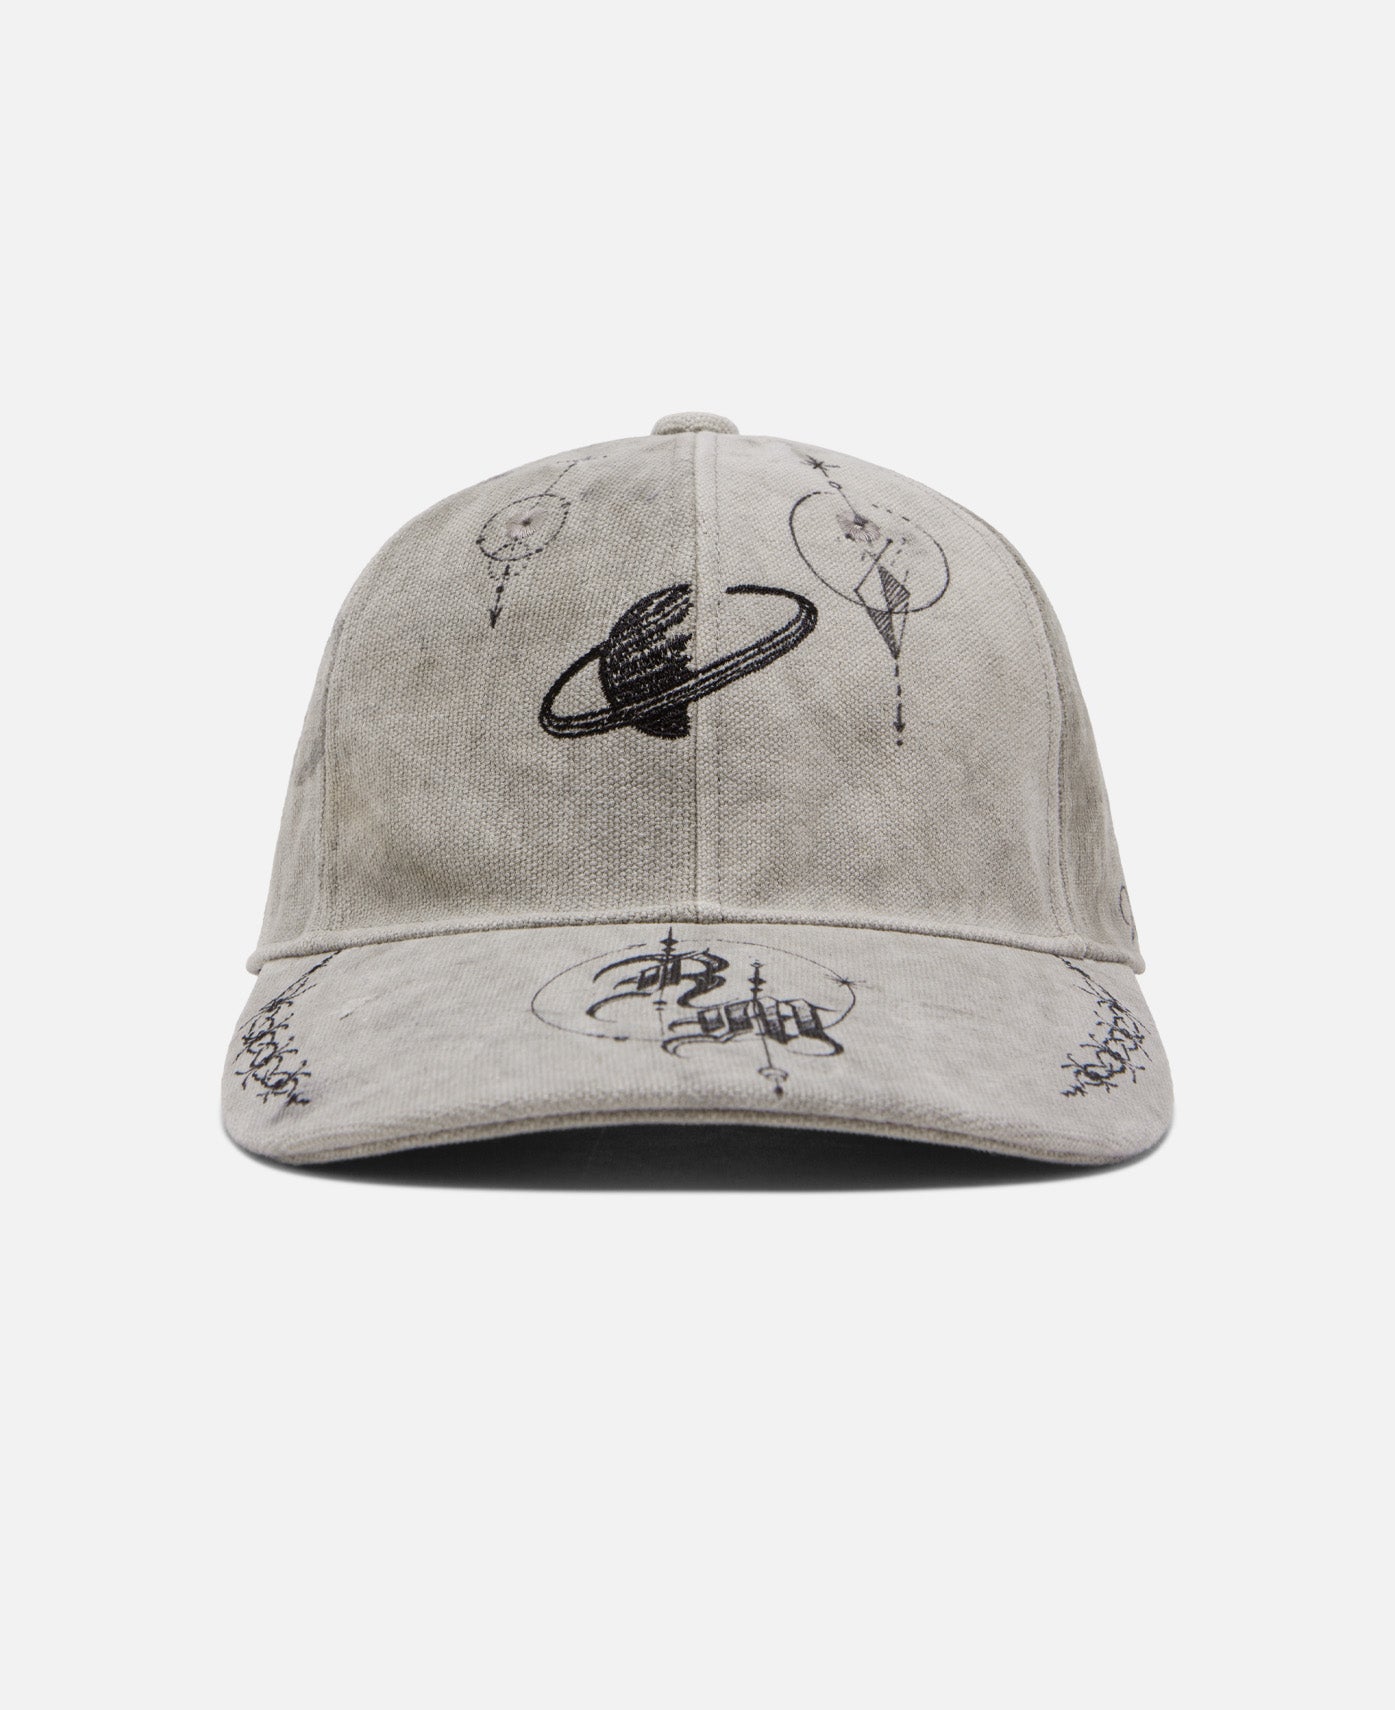 Readymade x Dr. Woo - Tattoo Cap (White) – JUICESTORE